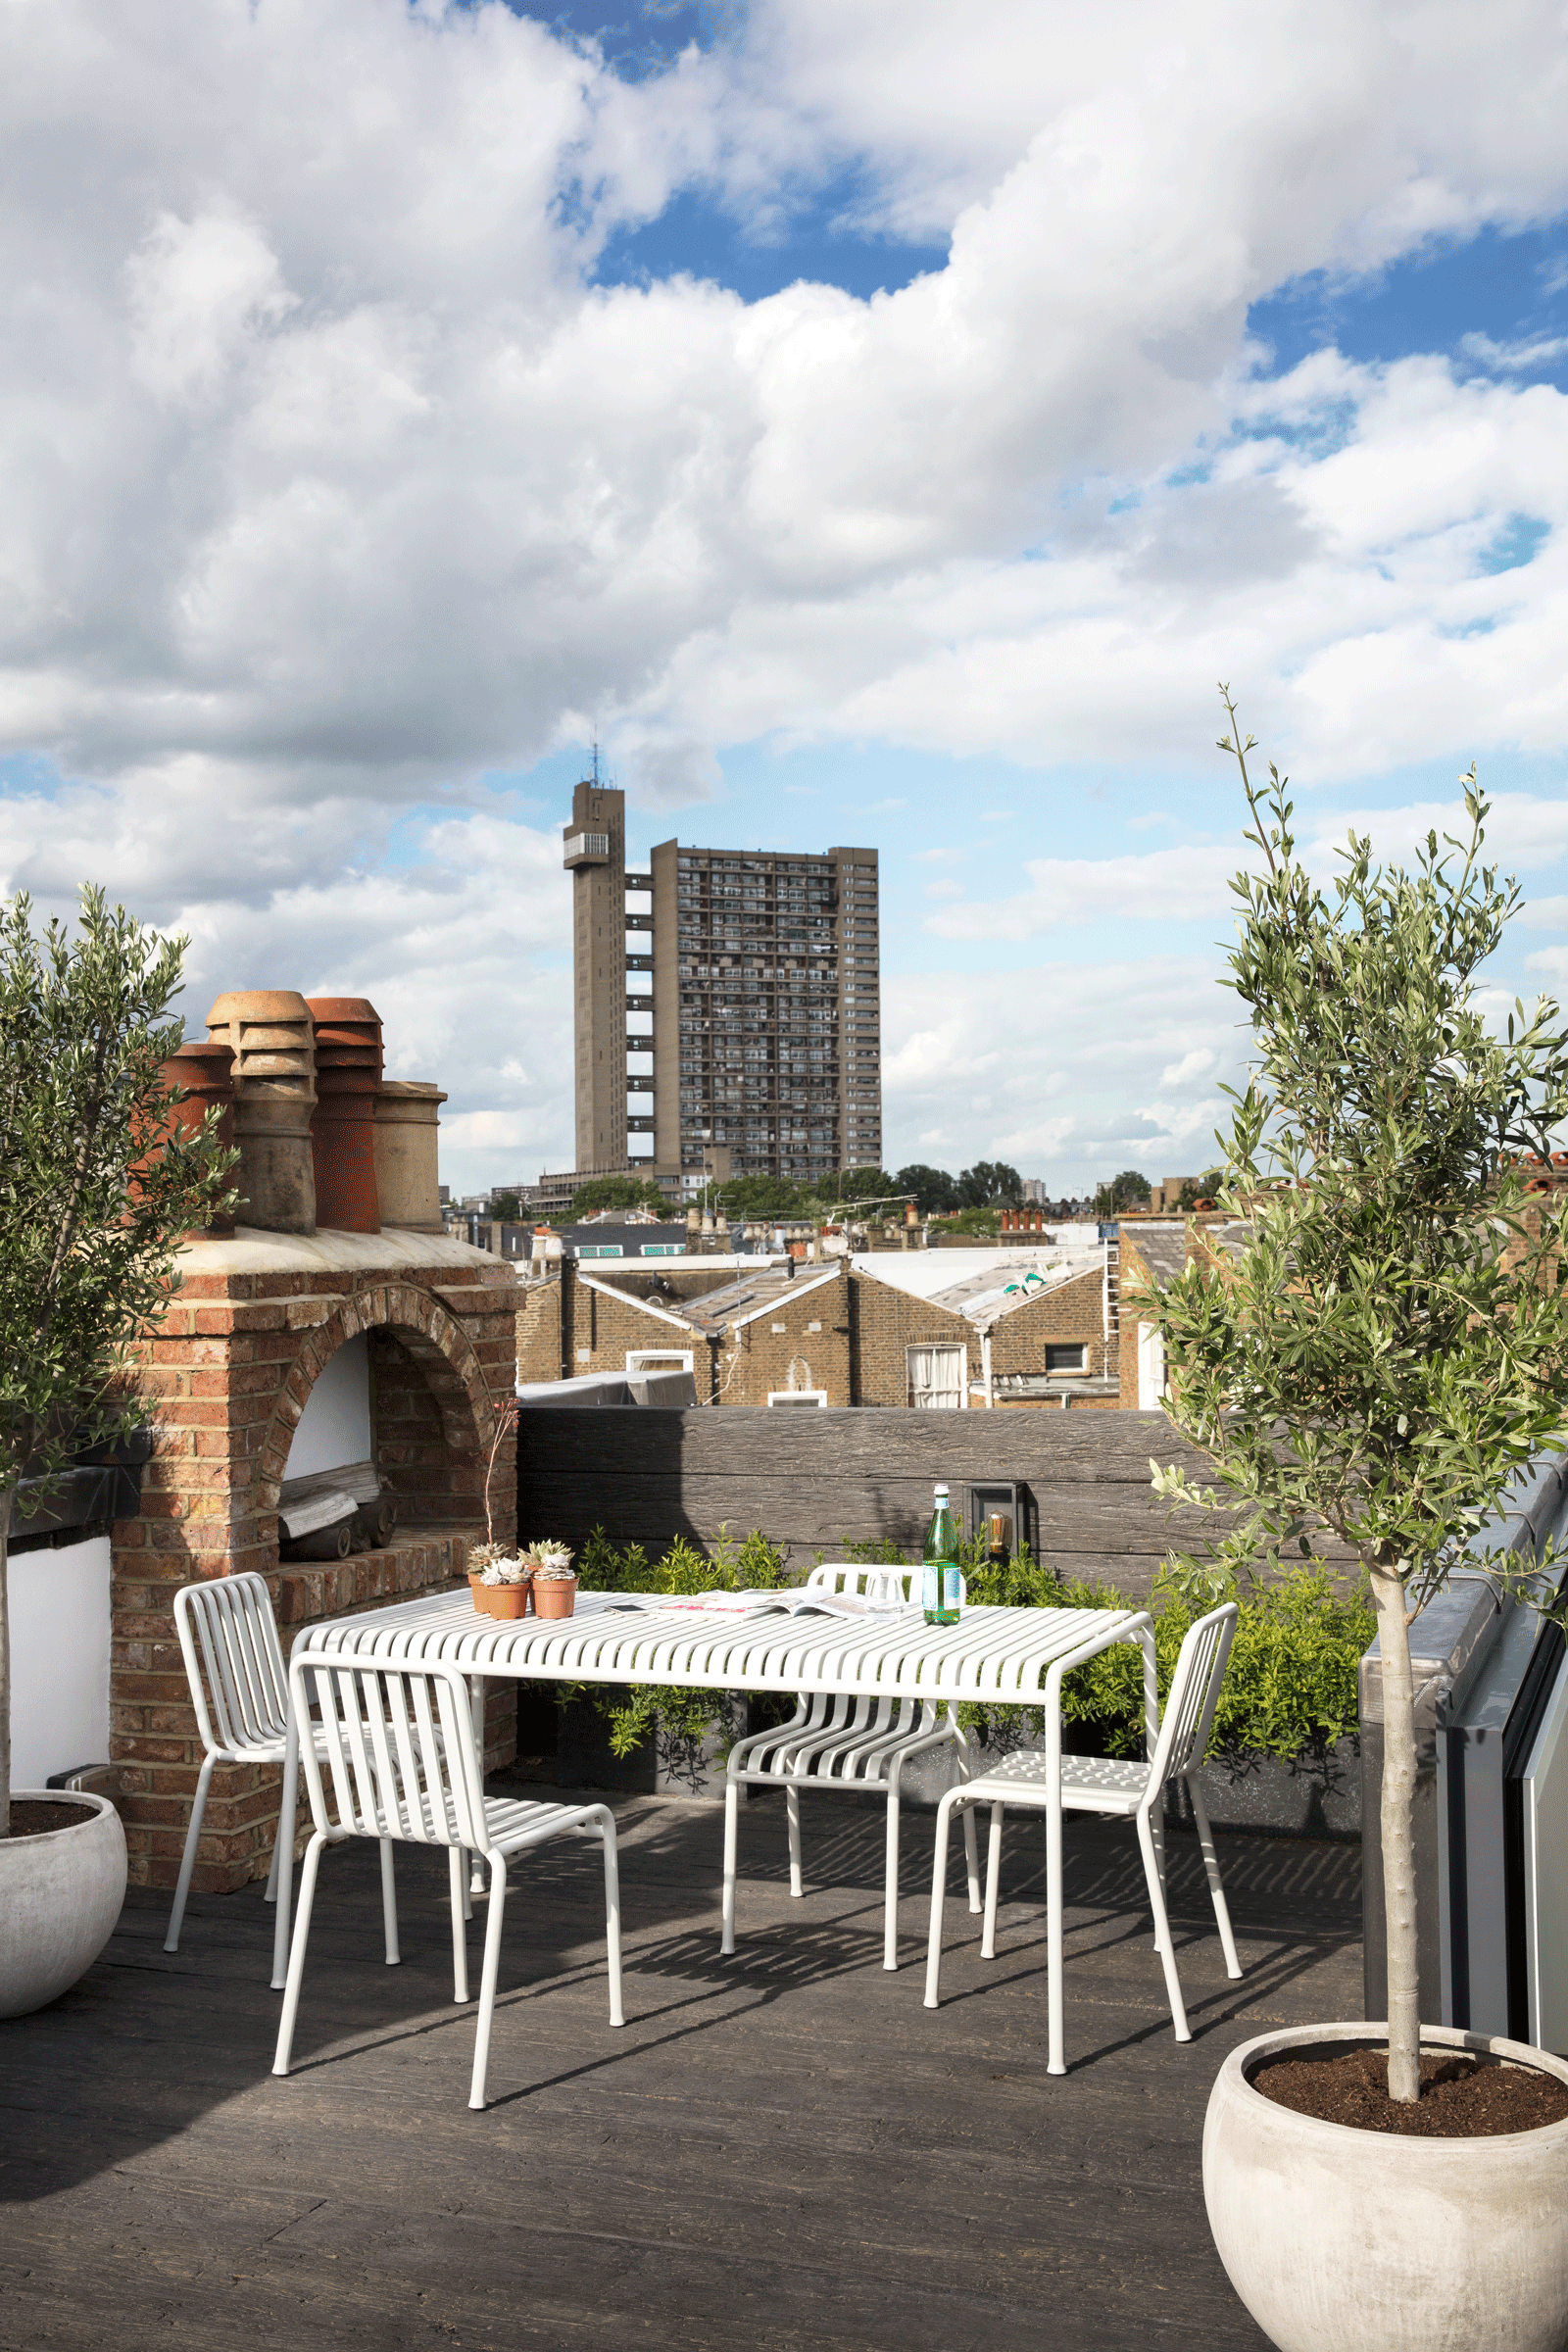 roof garden with a pizza oven